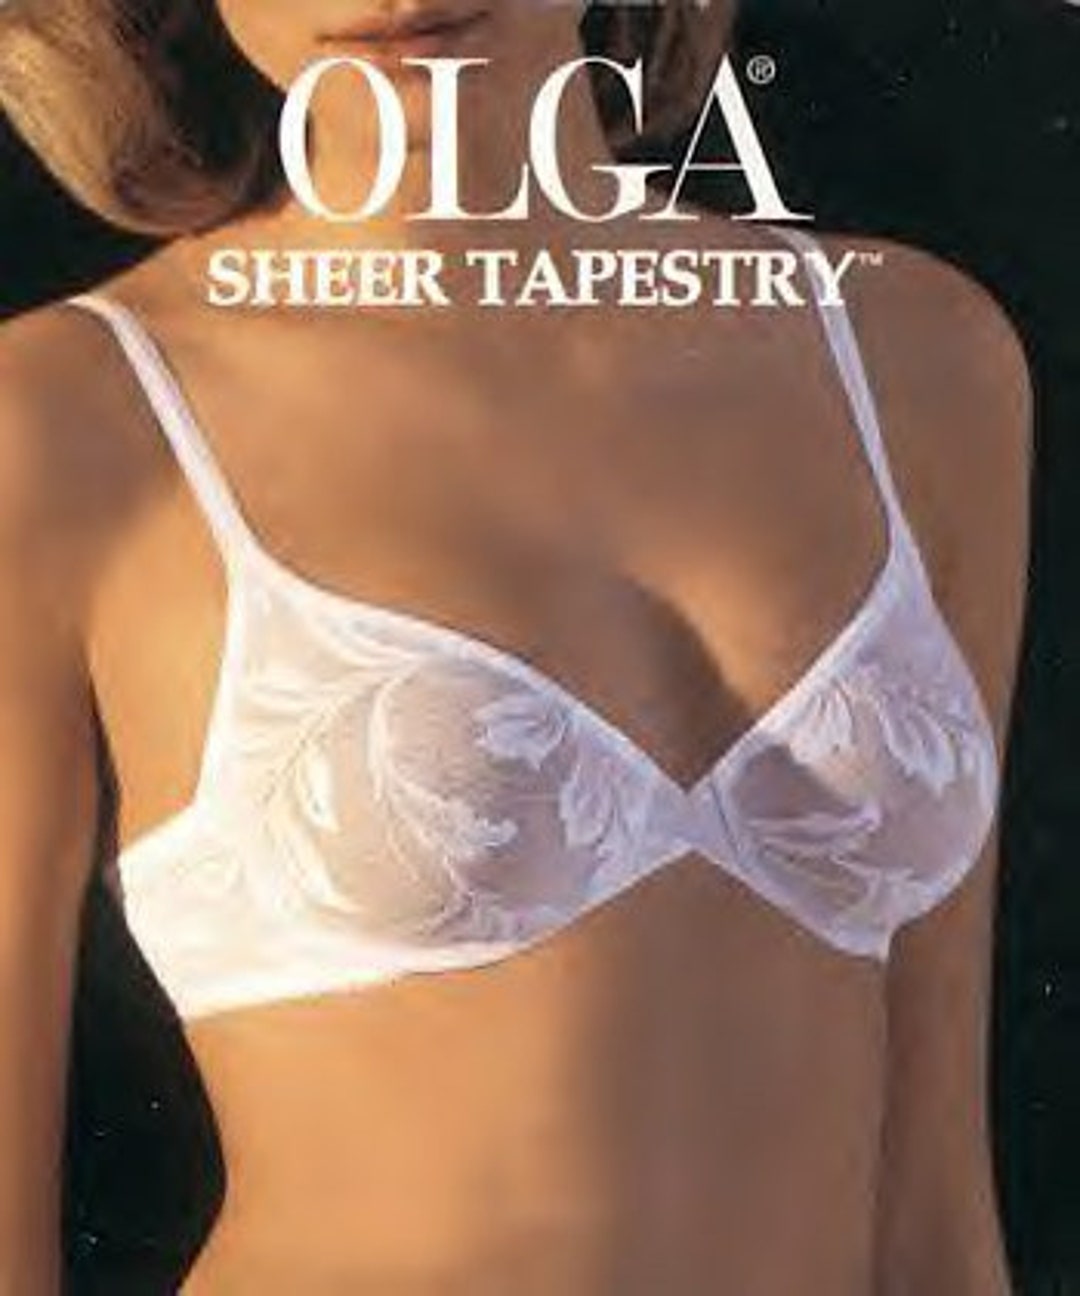 Vintage New With Tags Olga Sheer Tapestry Full Support Underwire Bra White  34D 